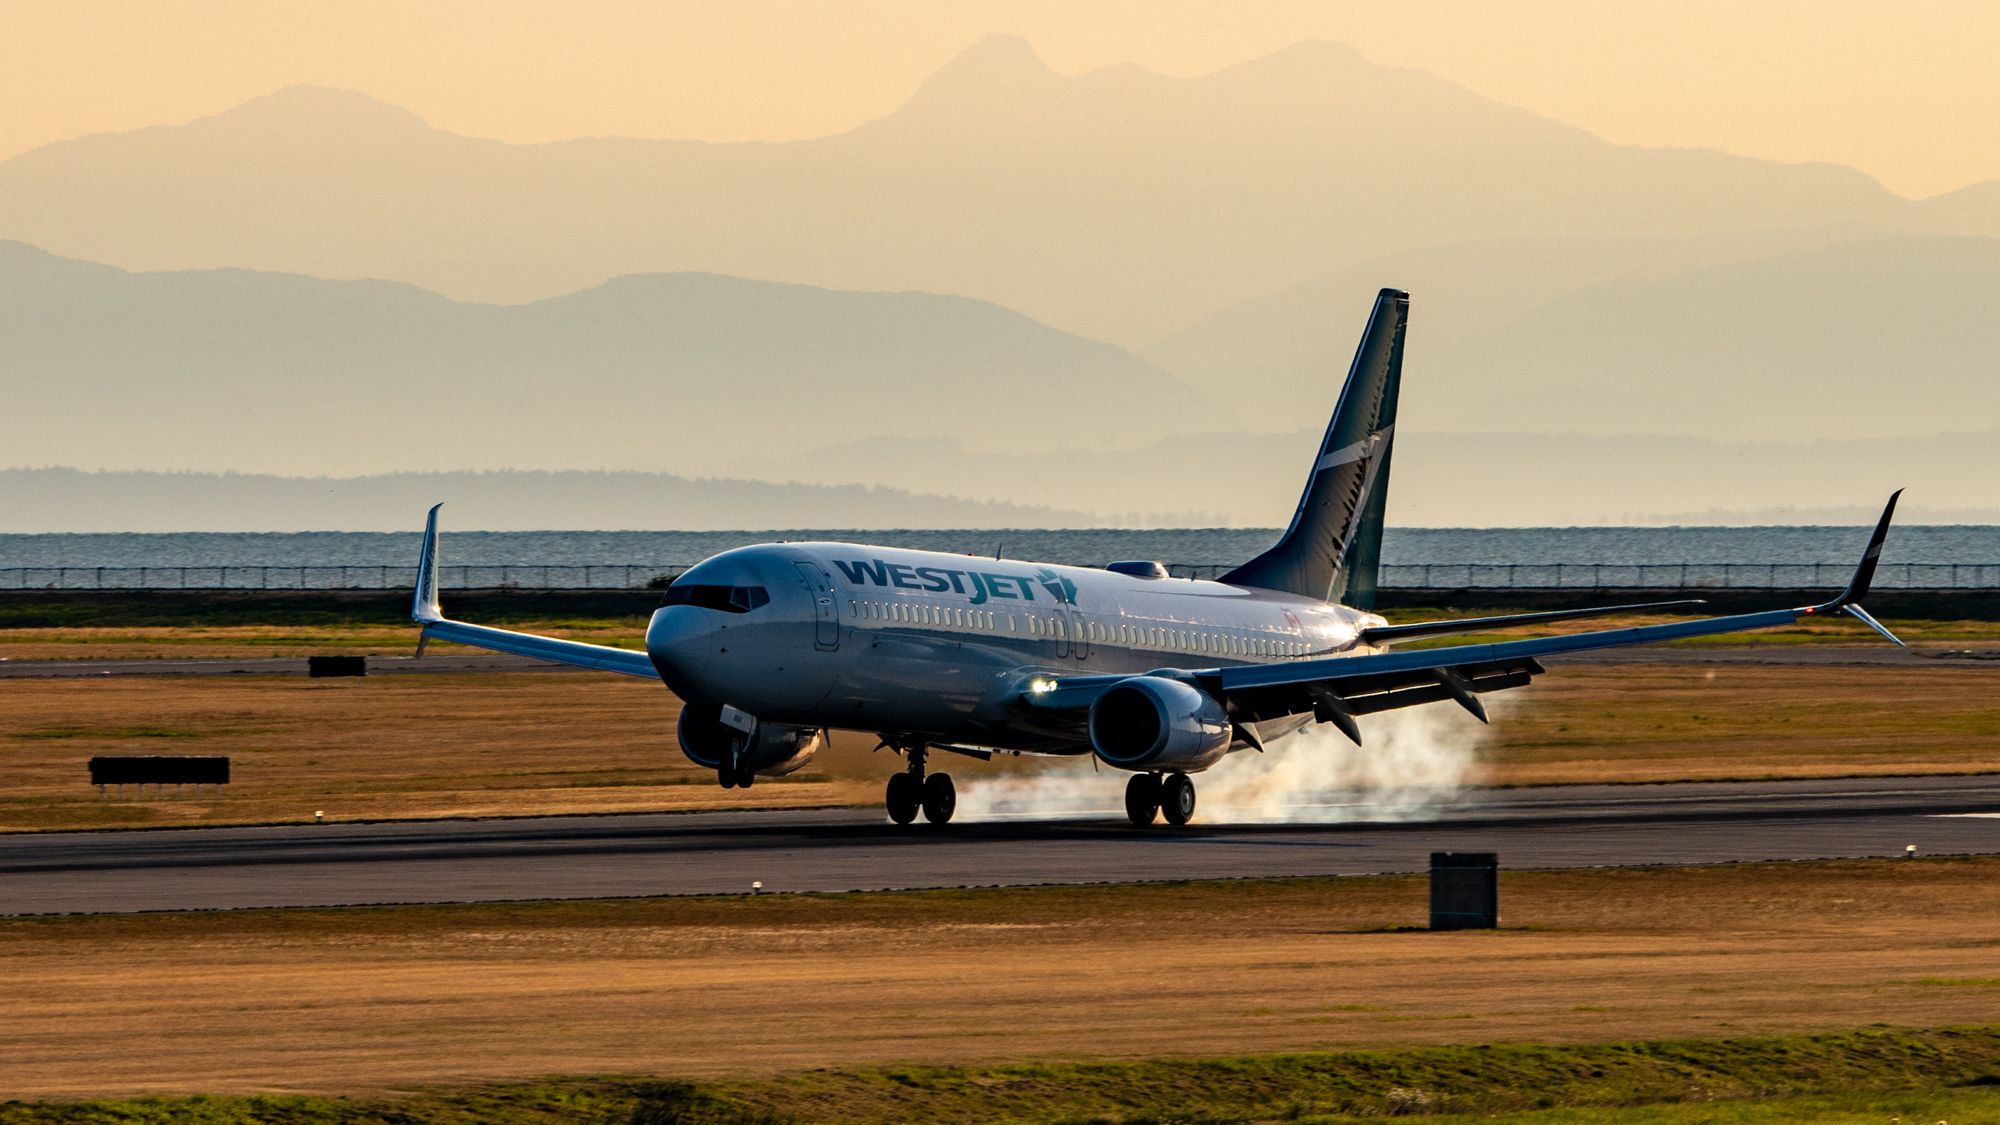 2MP_of_A 737-800 of WestJet Smokes the Mains in the YVR Sunset_01-1